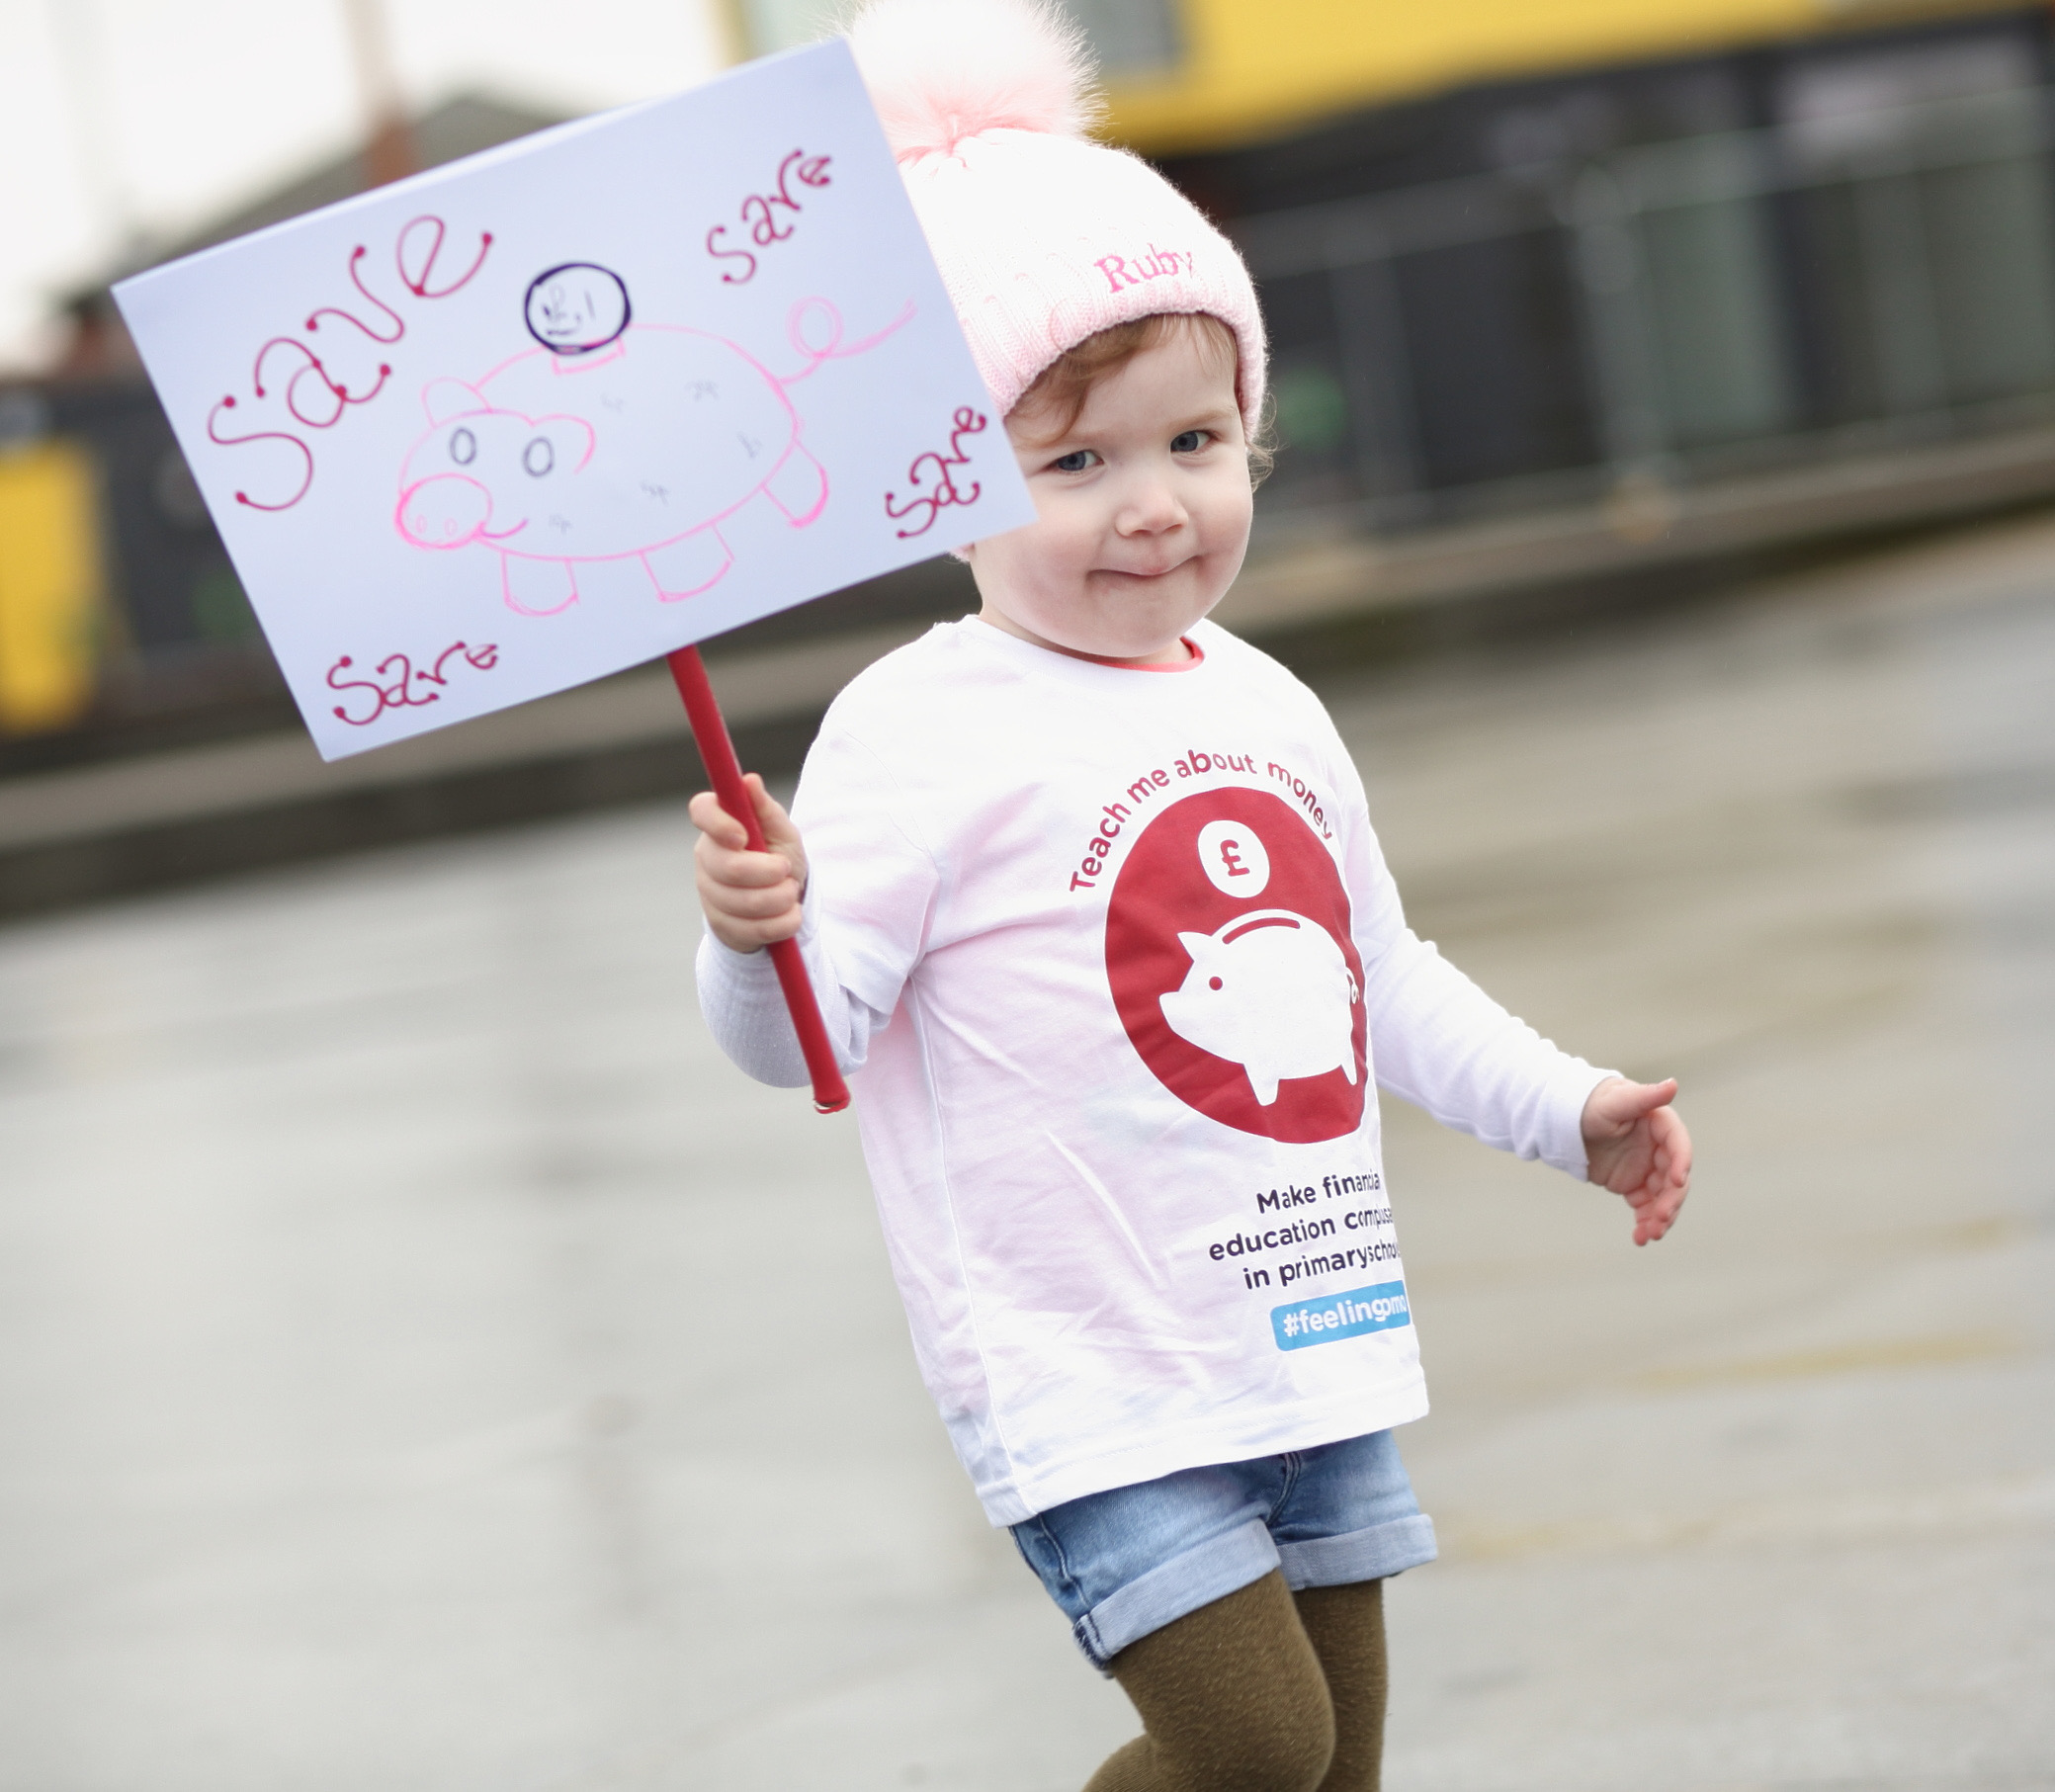 Ruby Kelly (age 2) takes to the streets, petitioning for financial education to be made compulsory in UK primary schools